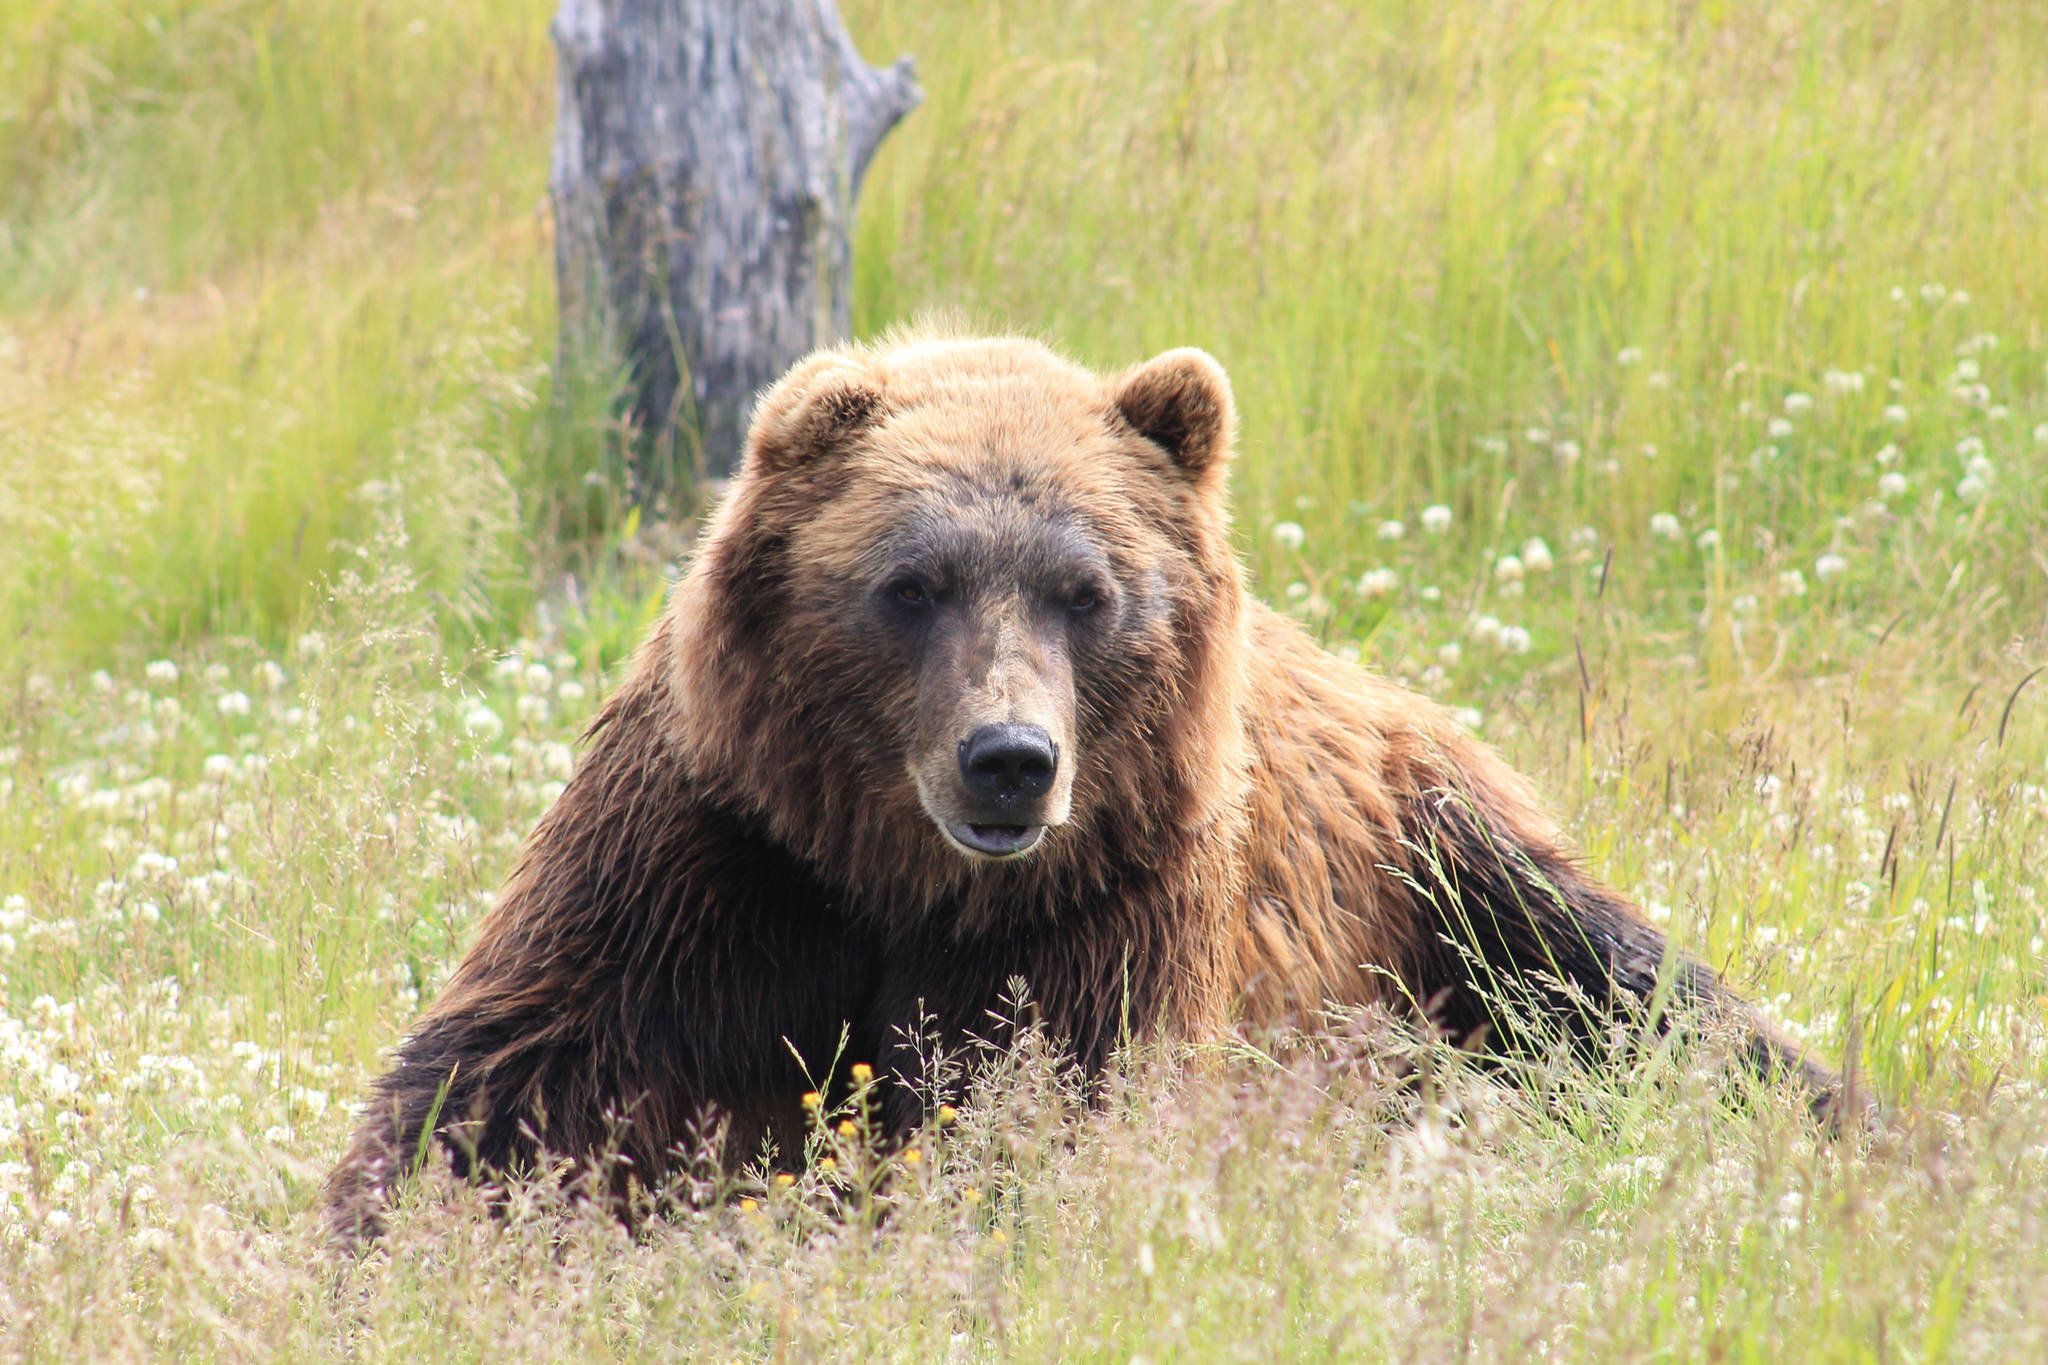 Second sighting of brown bear reported on Salmon Creek Trail